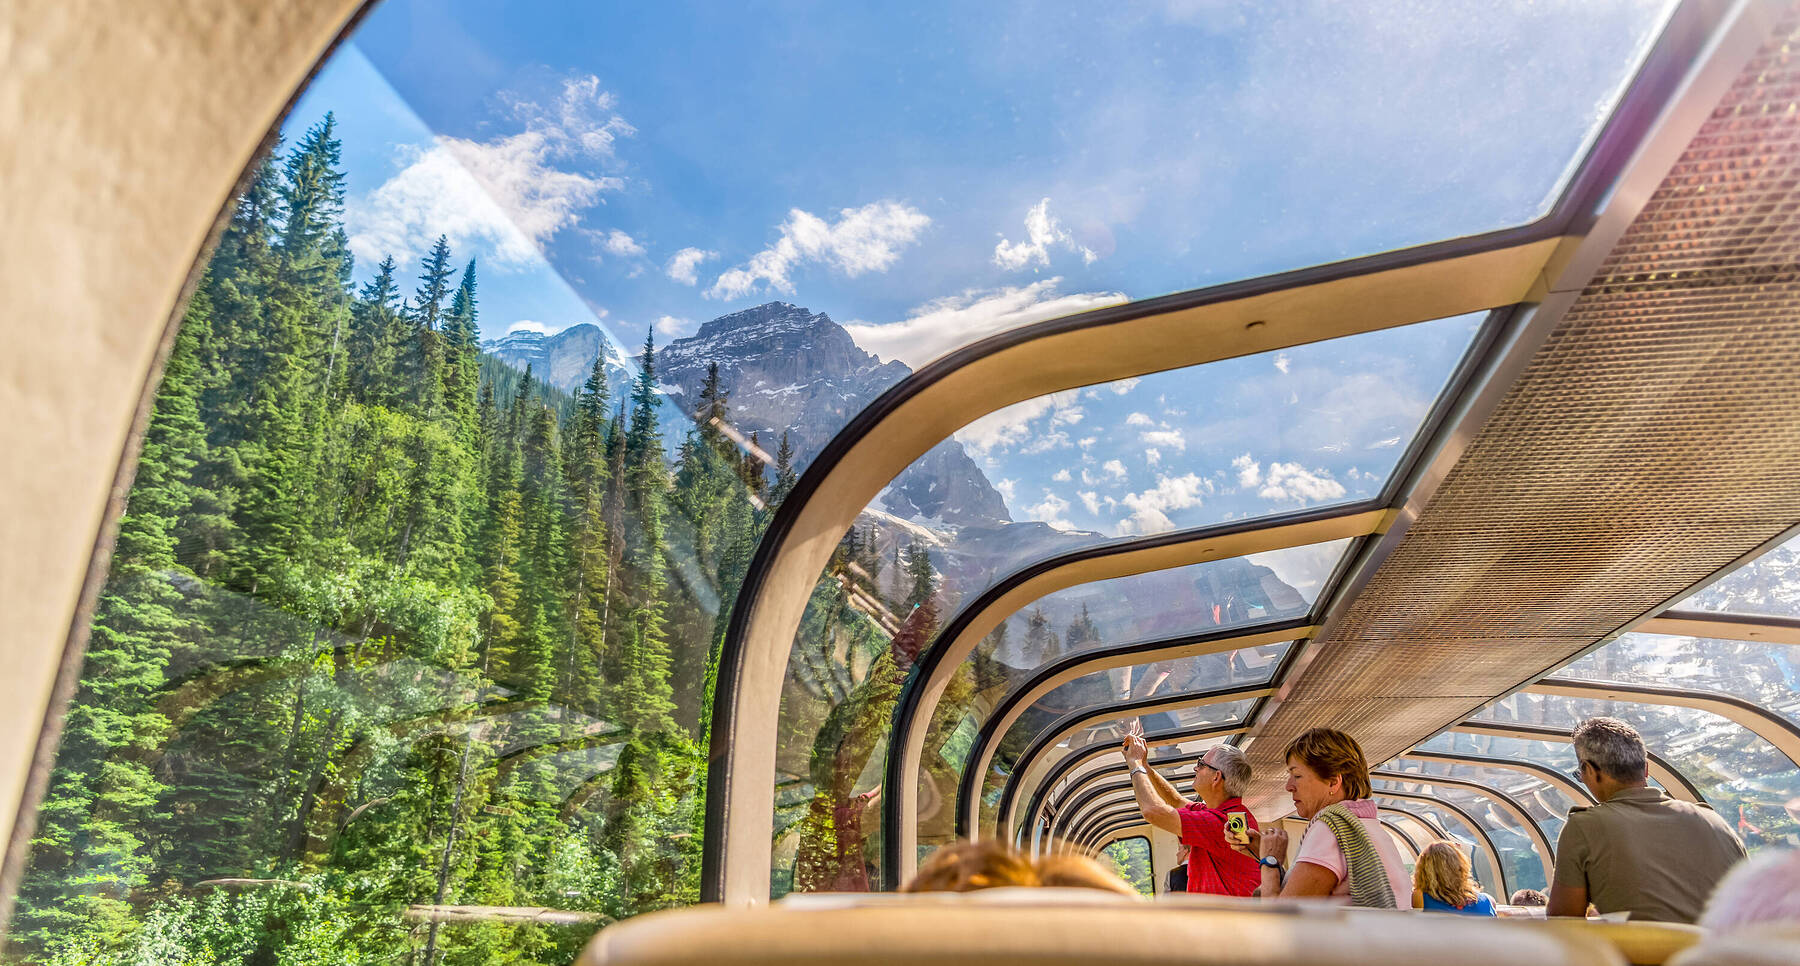 The Rocky Mountaineer Rail and River Tours